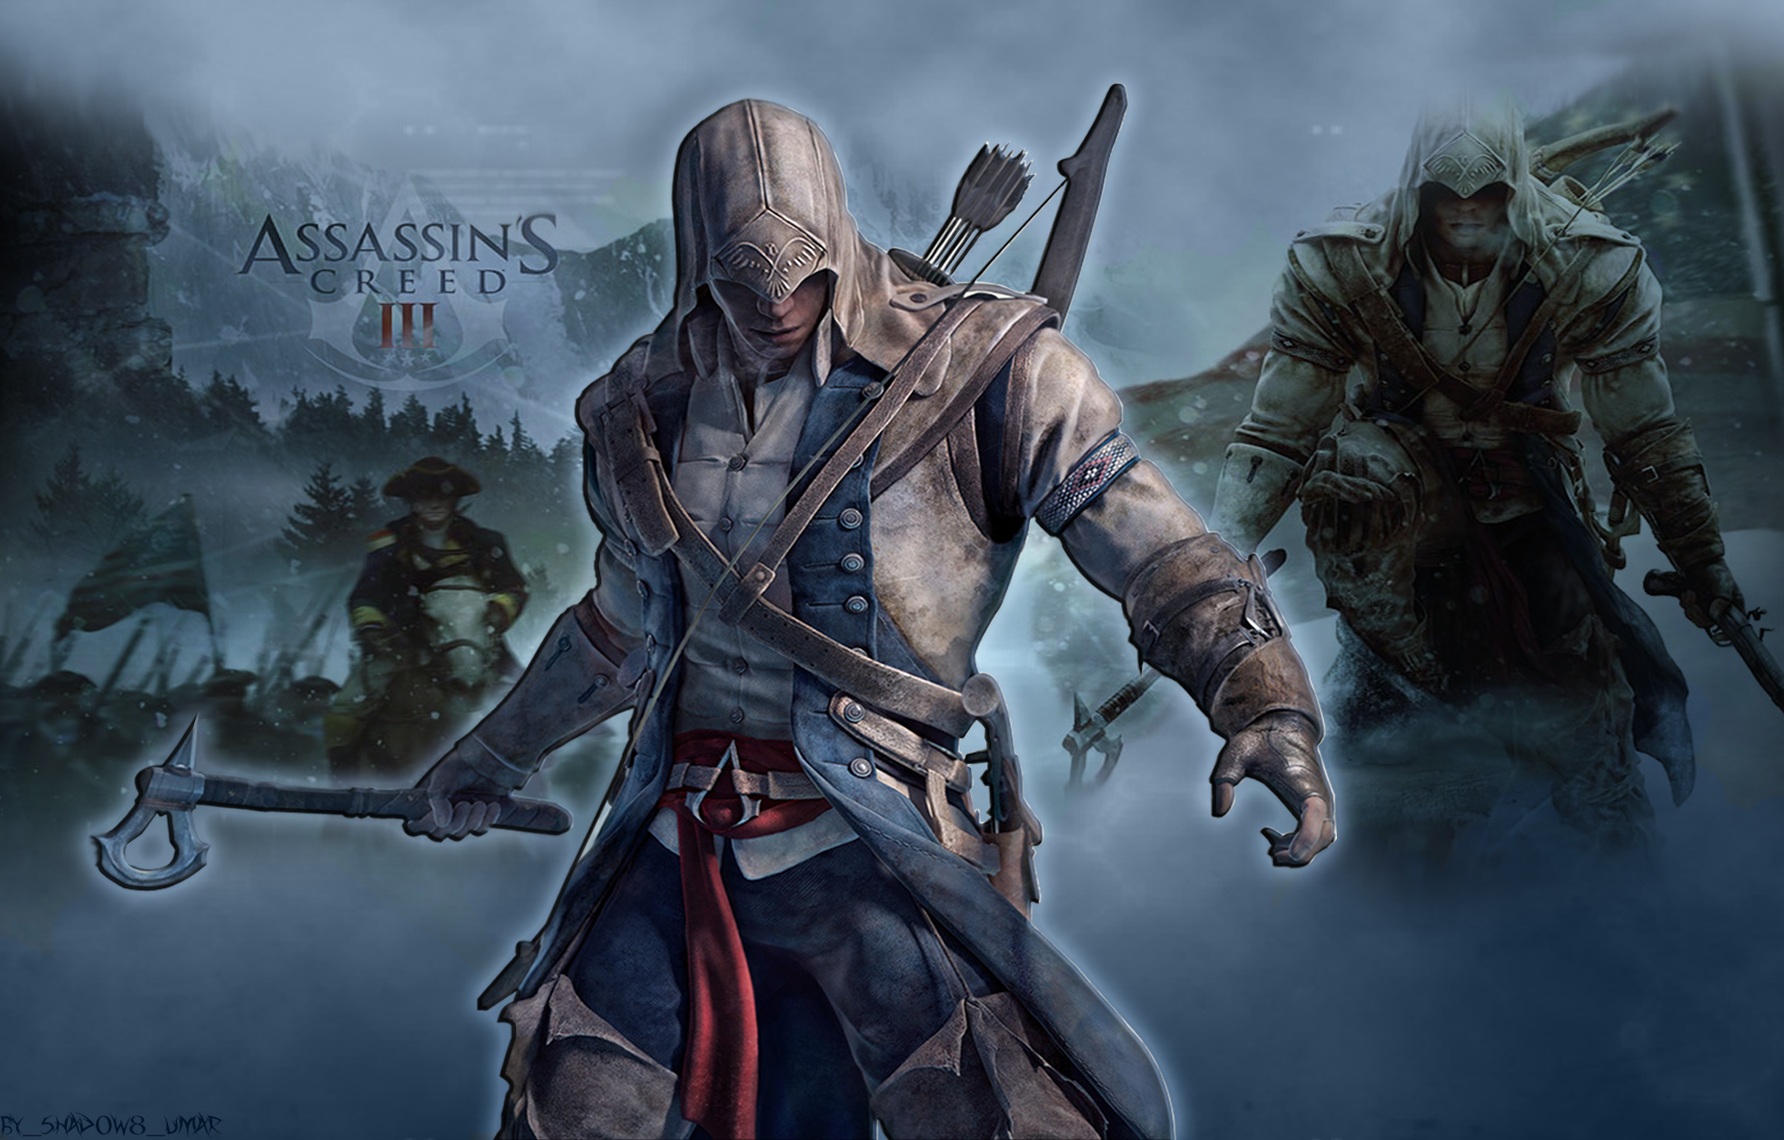 New Lock Screen Wallpapers video game, assassin's creed iii, assassin's creed, connor (assassin's creed)